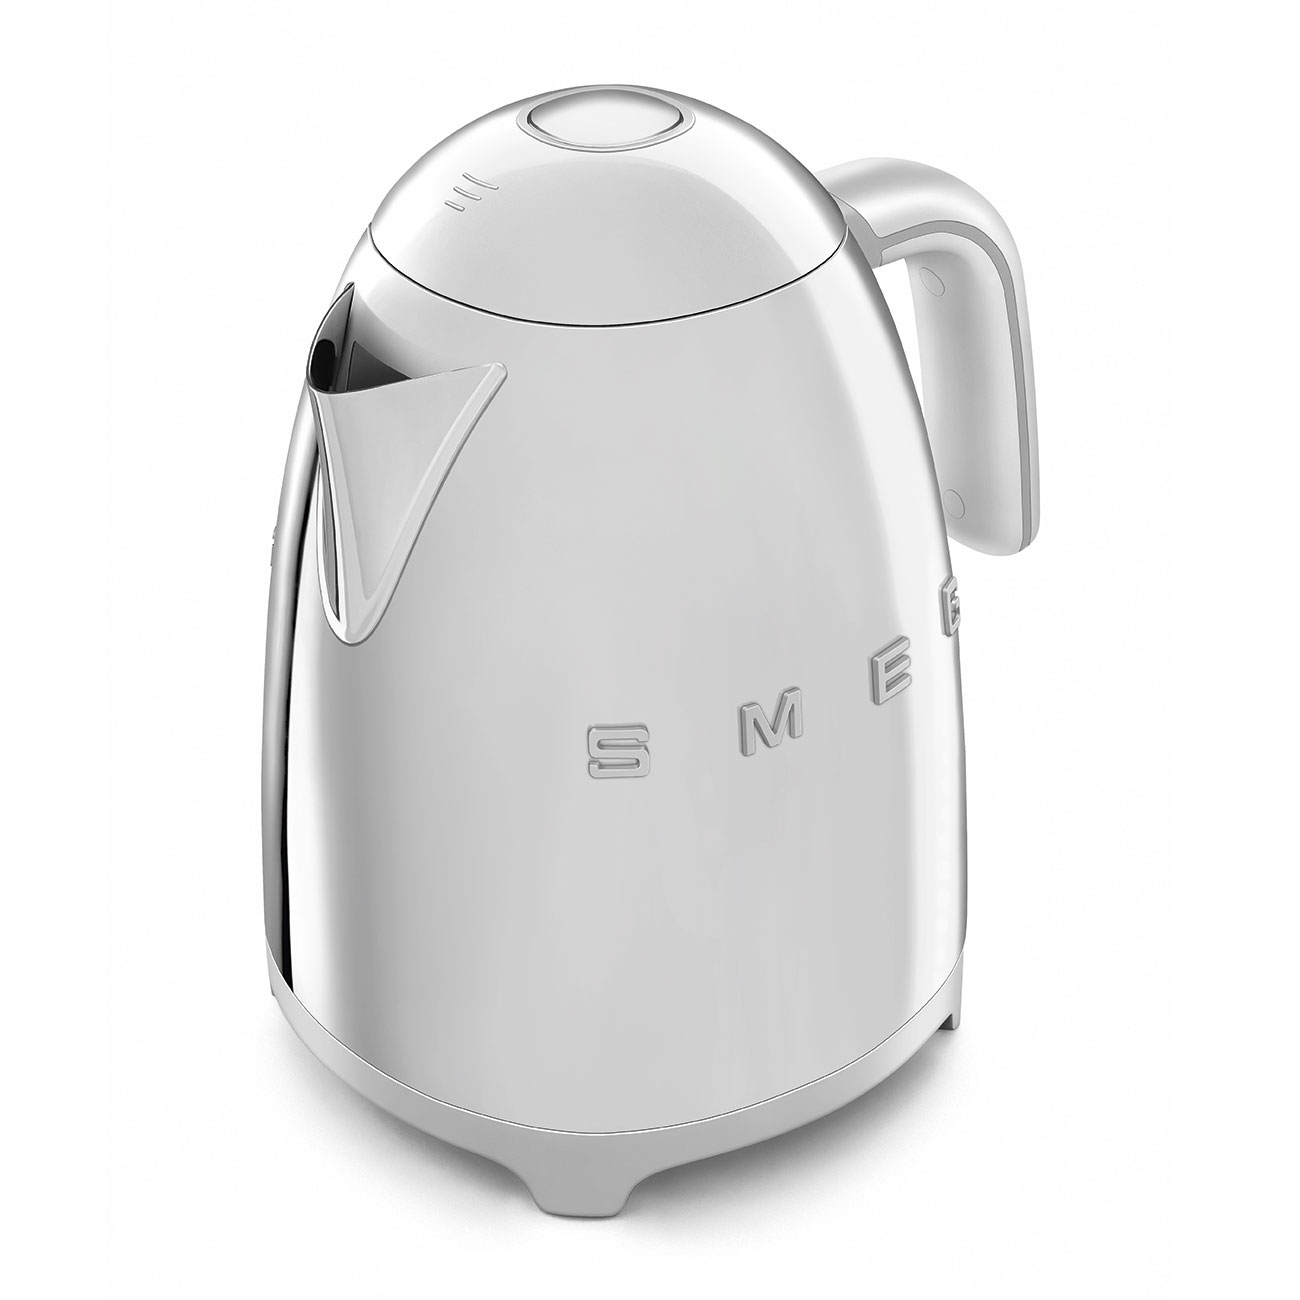 Smeg KLF03SSUS 50's Retro Style Aesthetic Electric Kettle with Embossed  Logo, Polished Stainless Steel. 